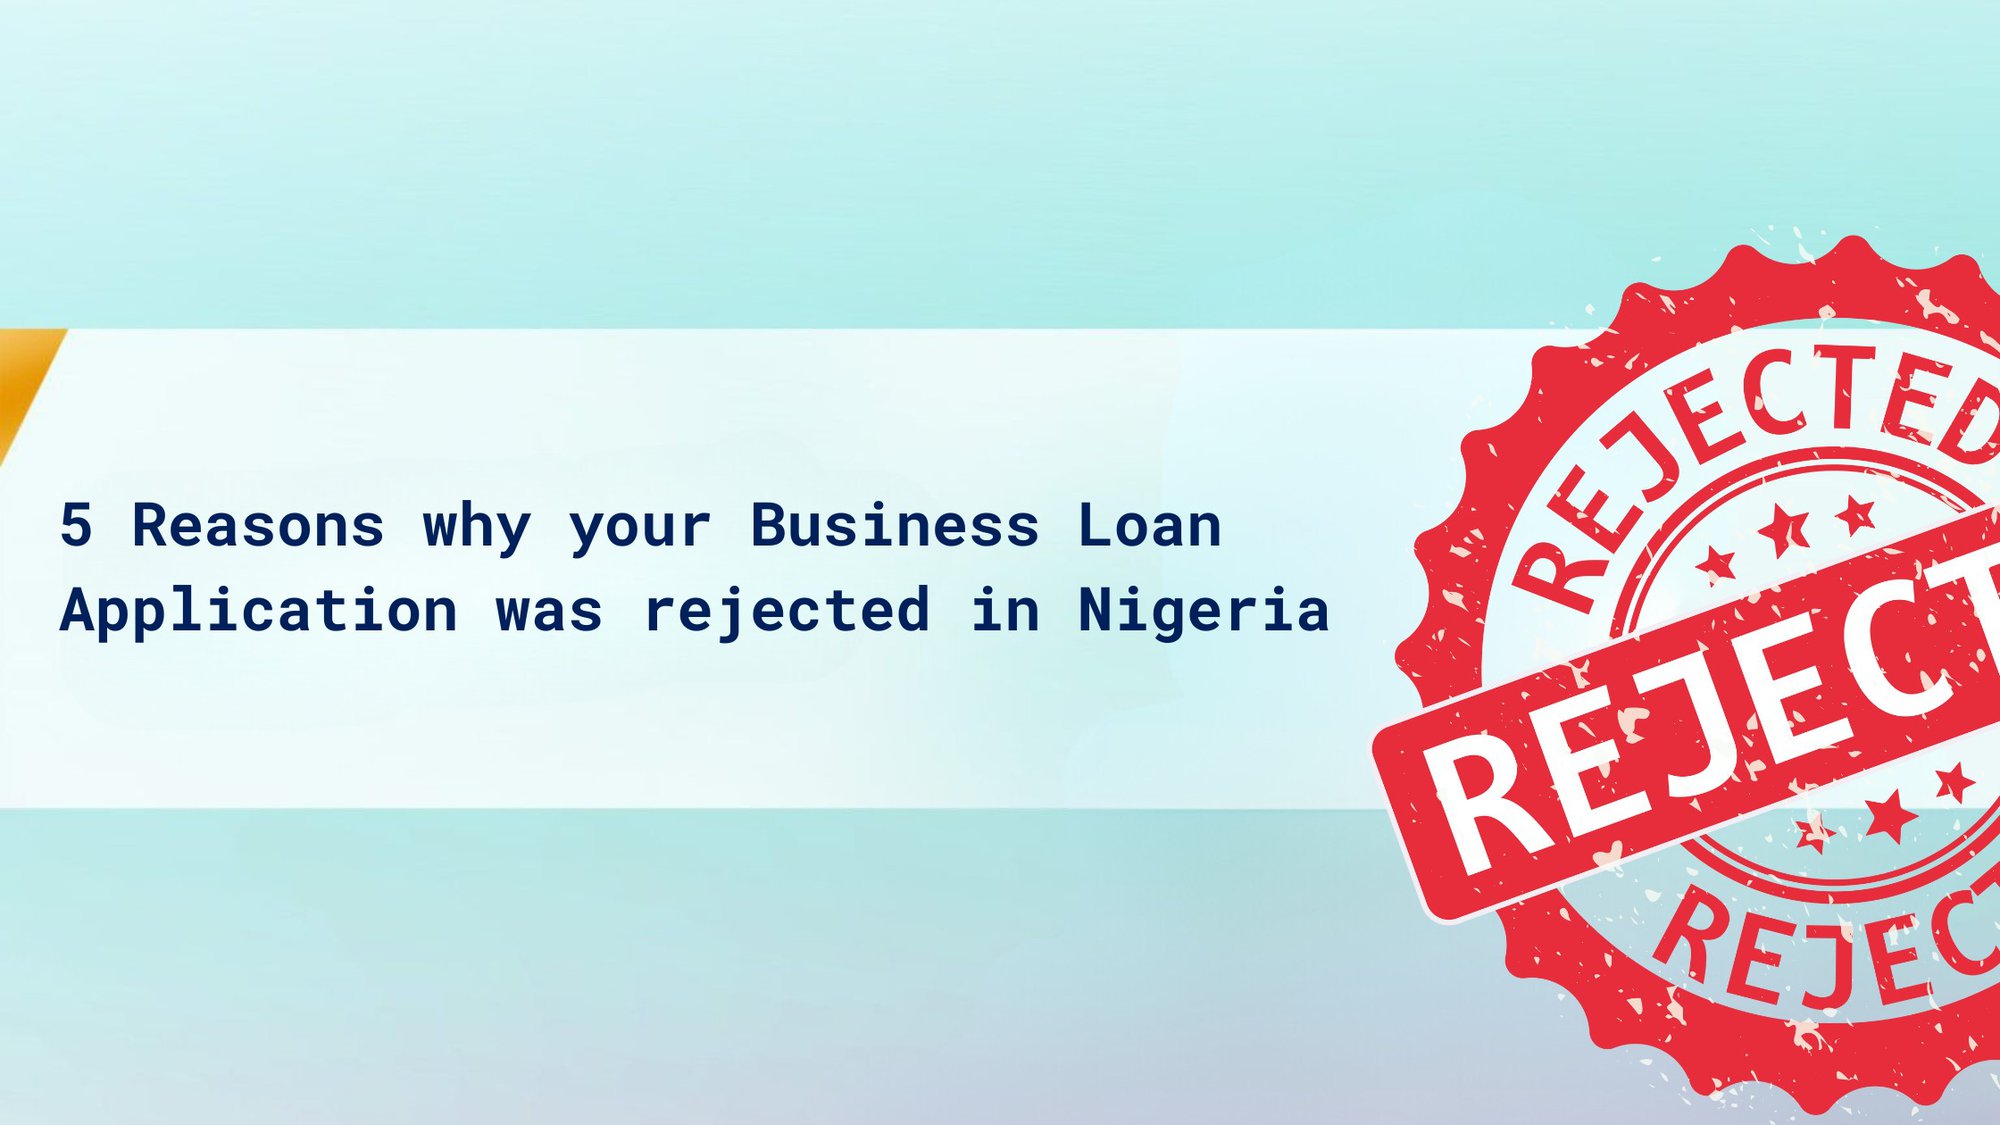 Business Loan application rejected in Nigeria